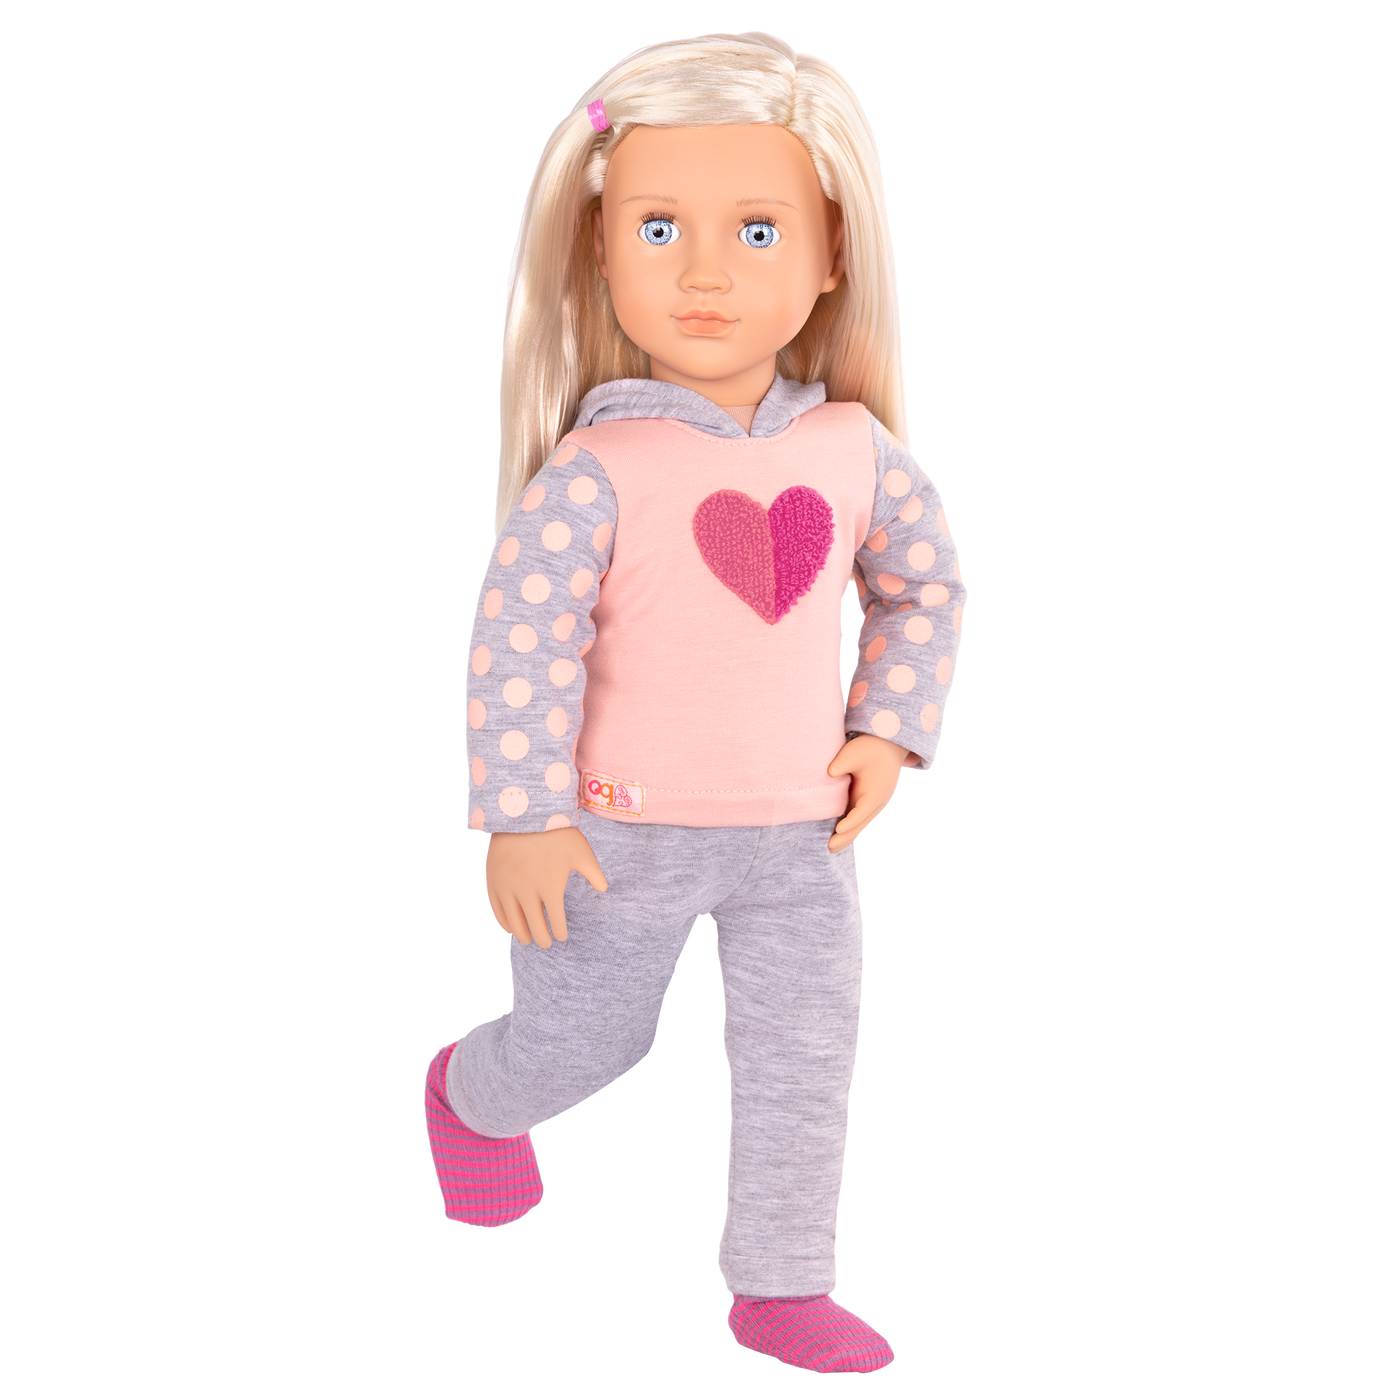 18-inch doll with blonde hair, pale blue eyes, hospital accessories and storybook